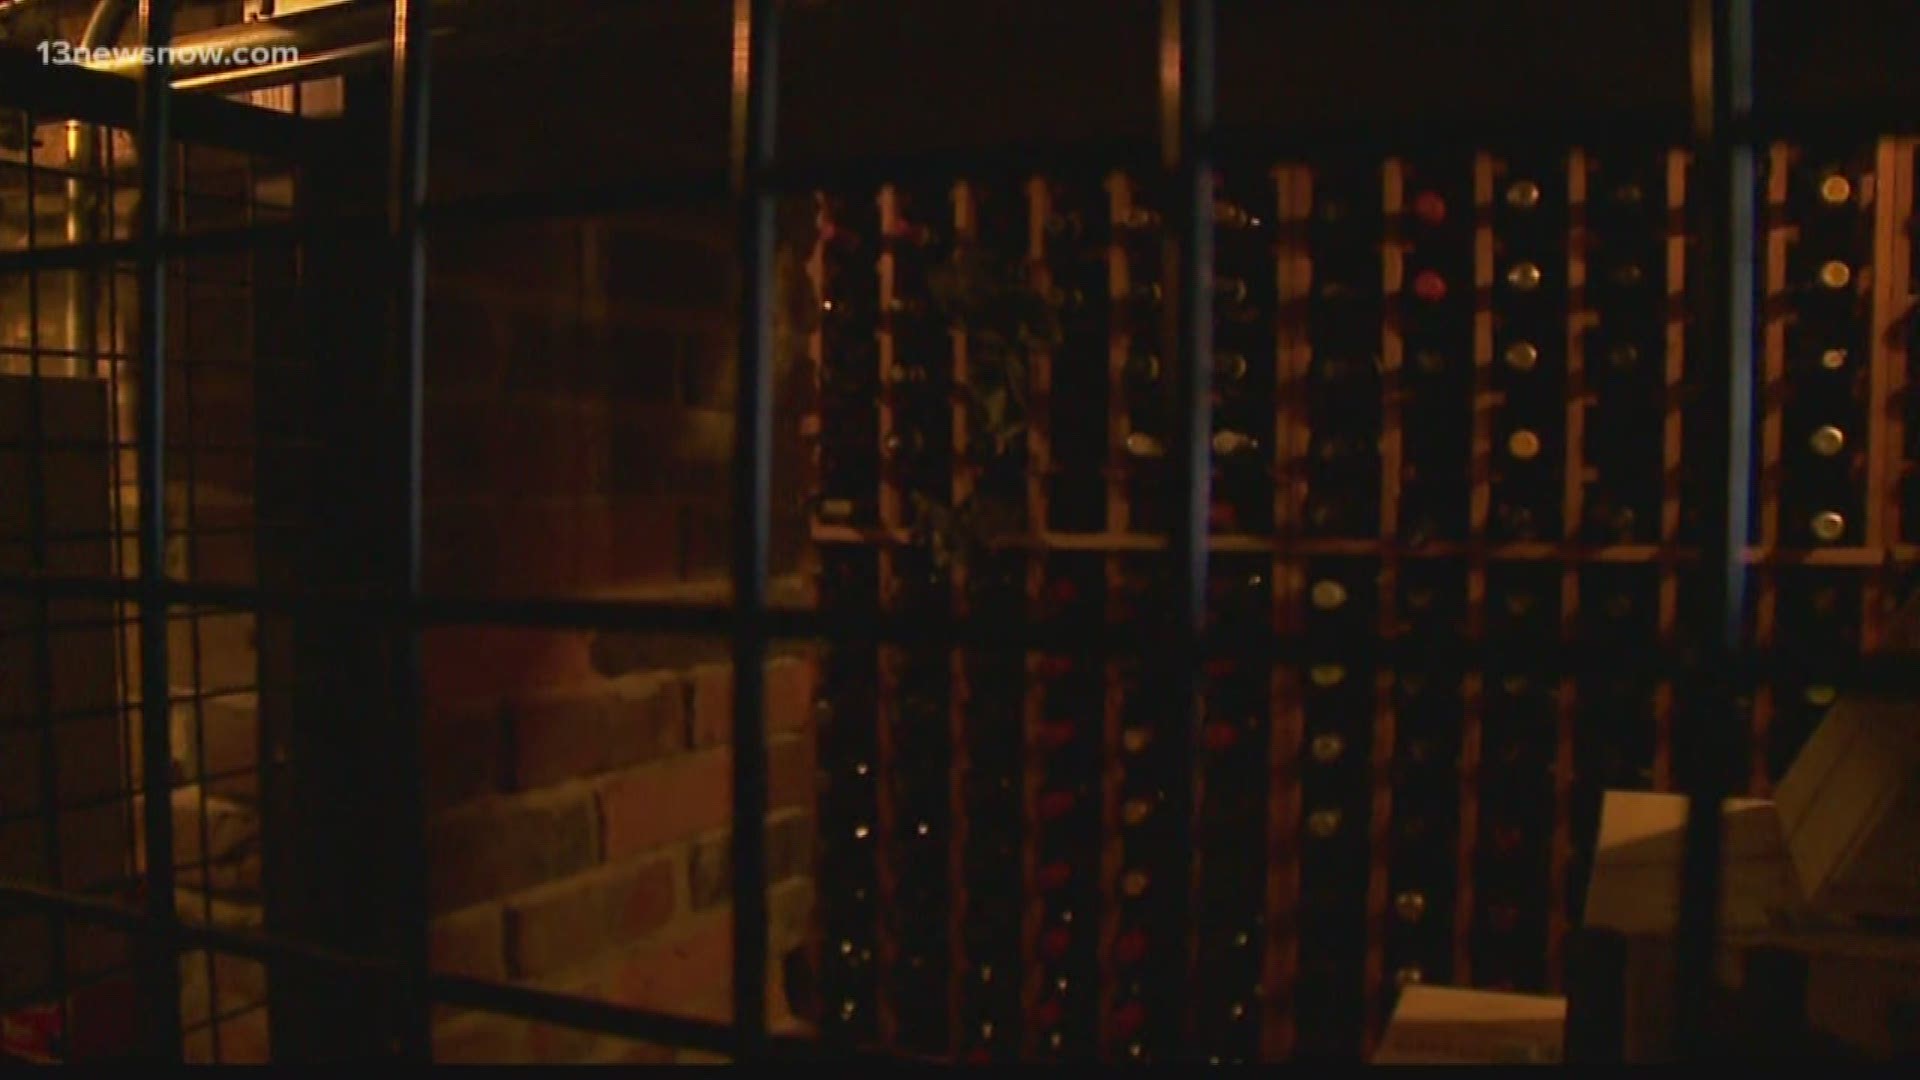 We take you through the wine cellars at an upscale restaurant in Downtown Norfolk.